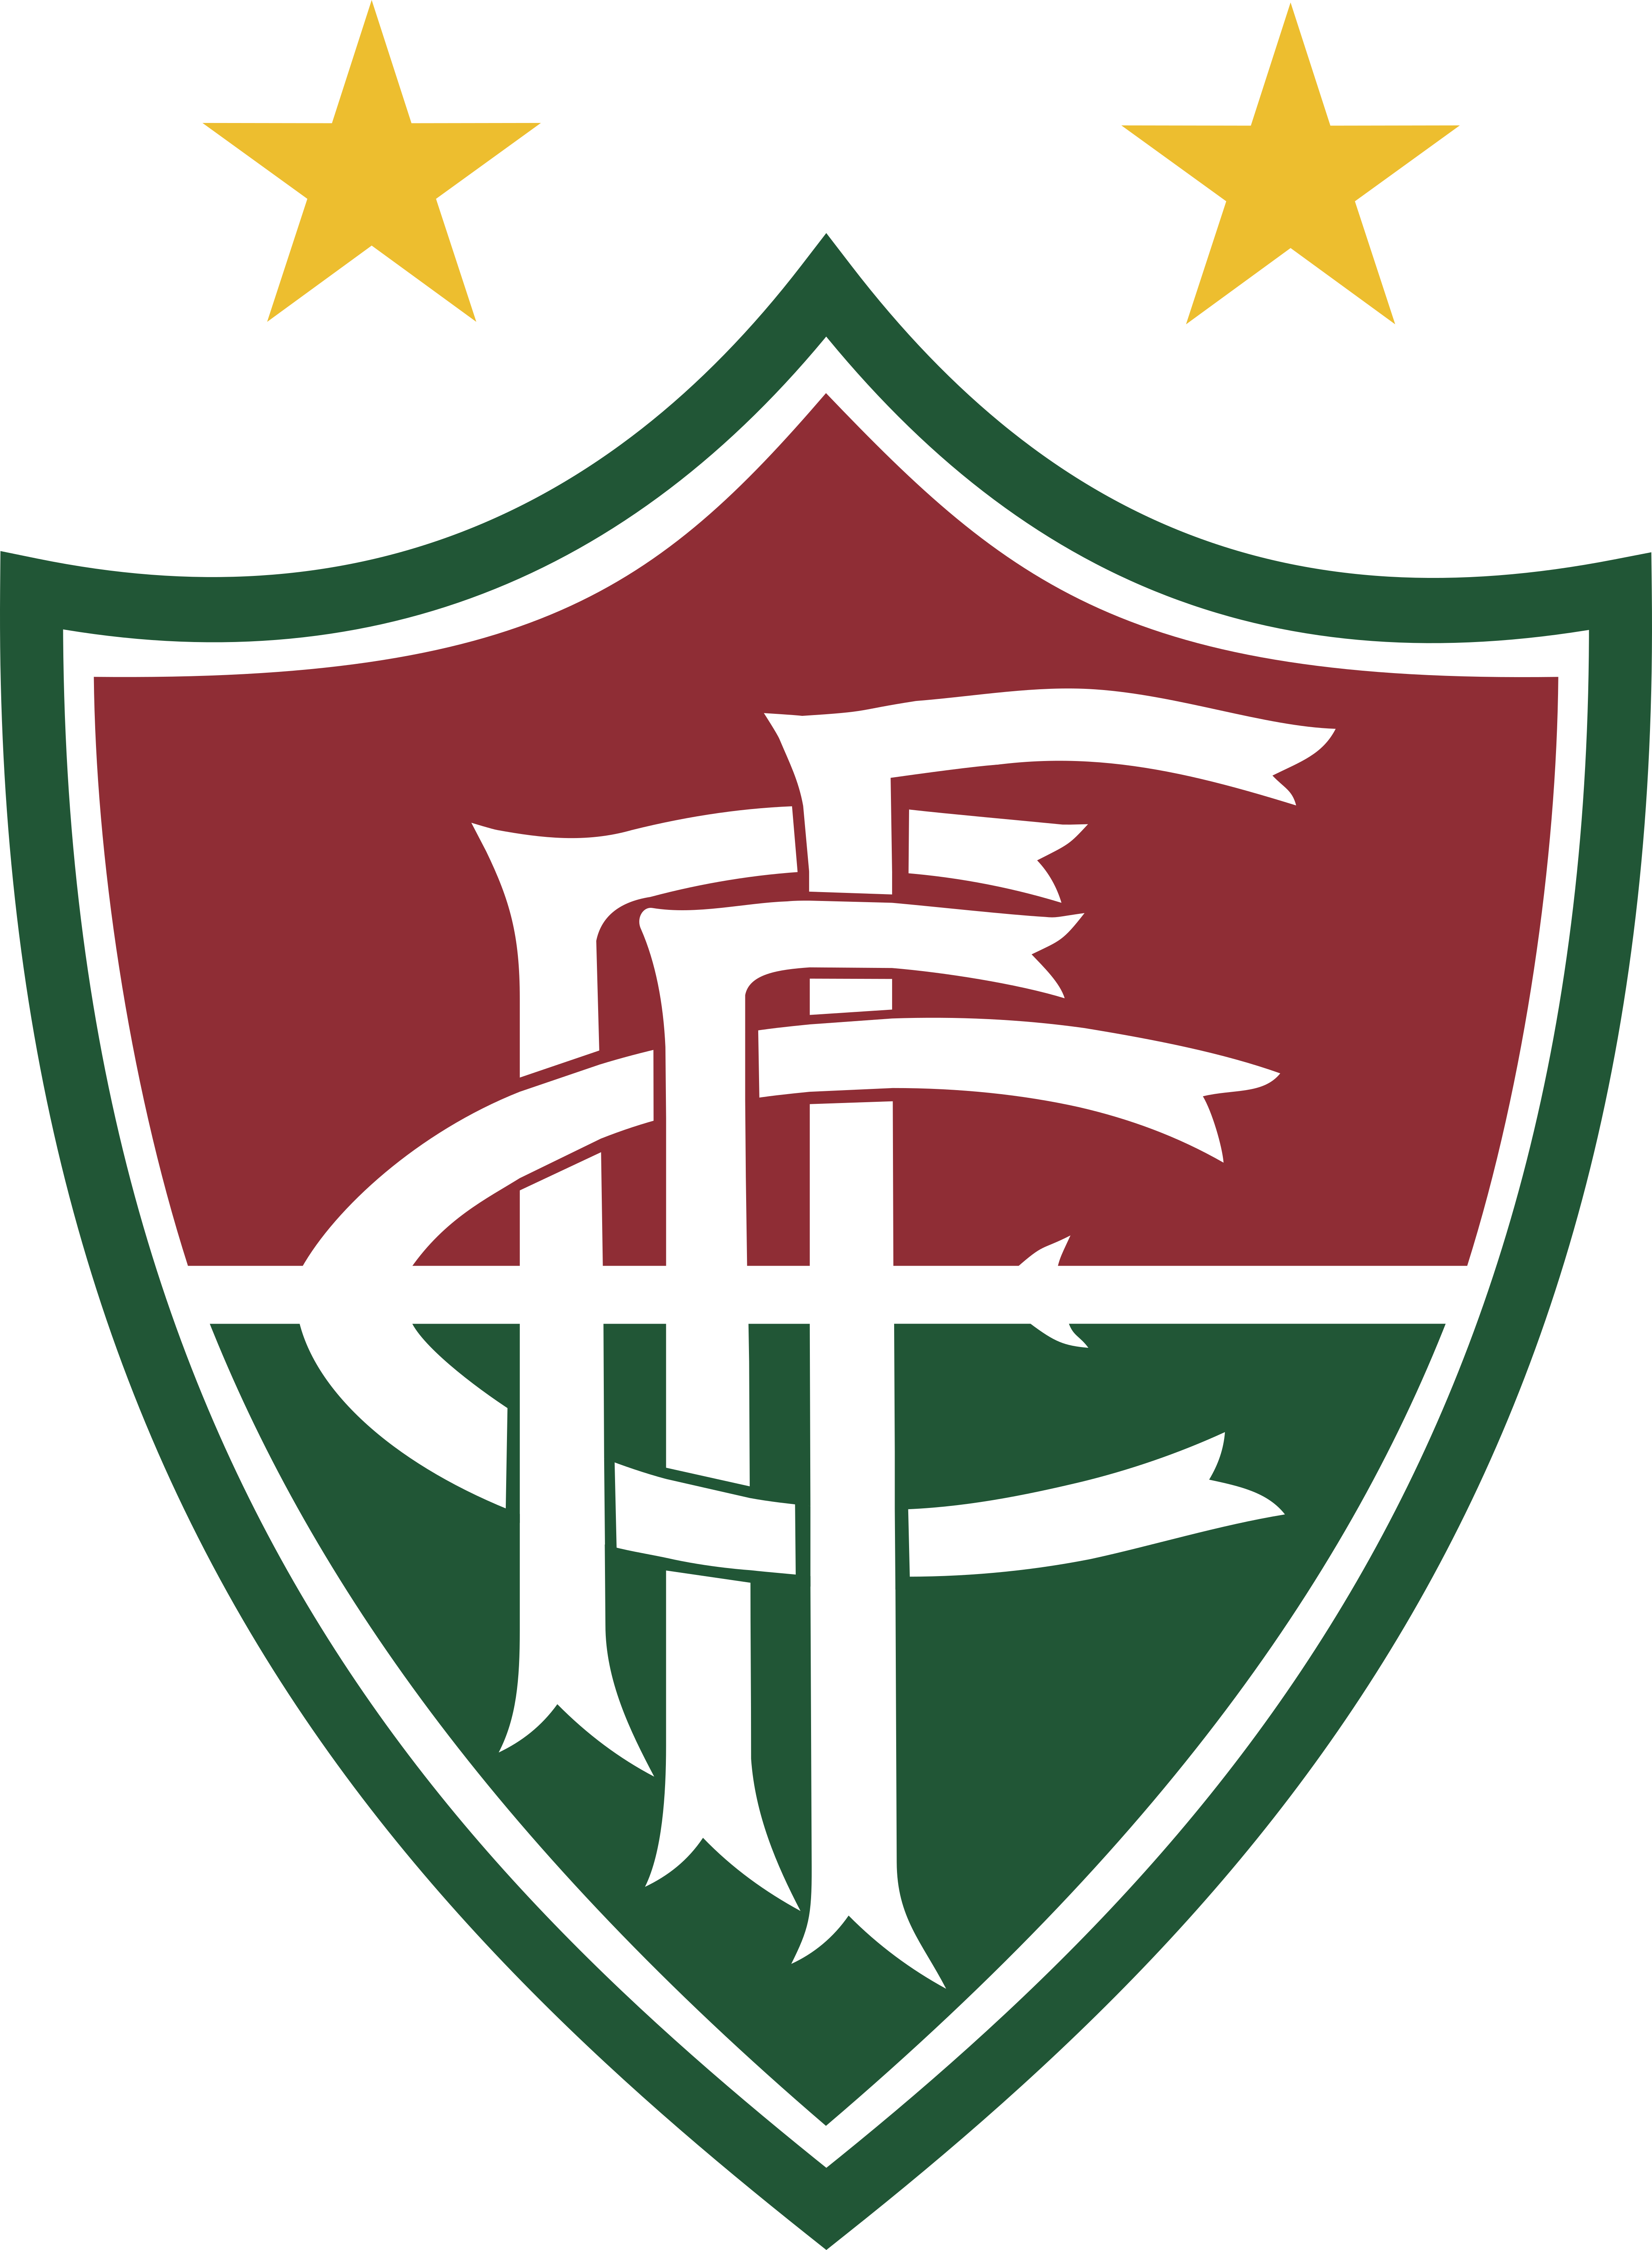 Escudo Do Fluminense Fc Png Transparent Image Png | Images and Photos ...